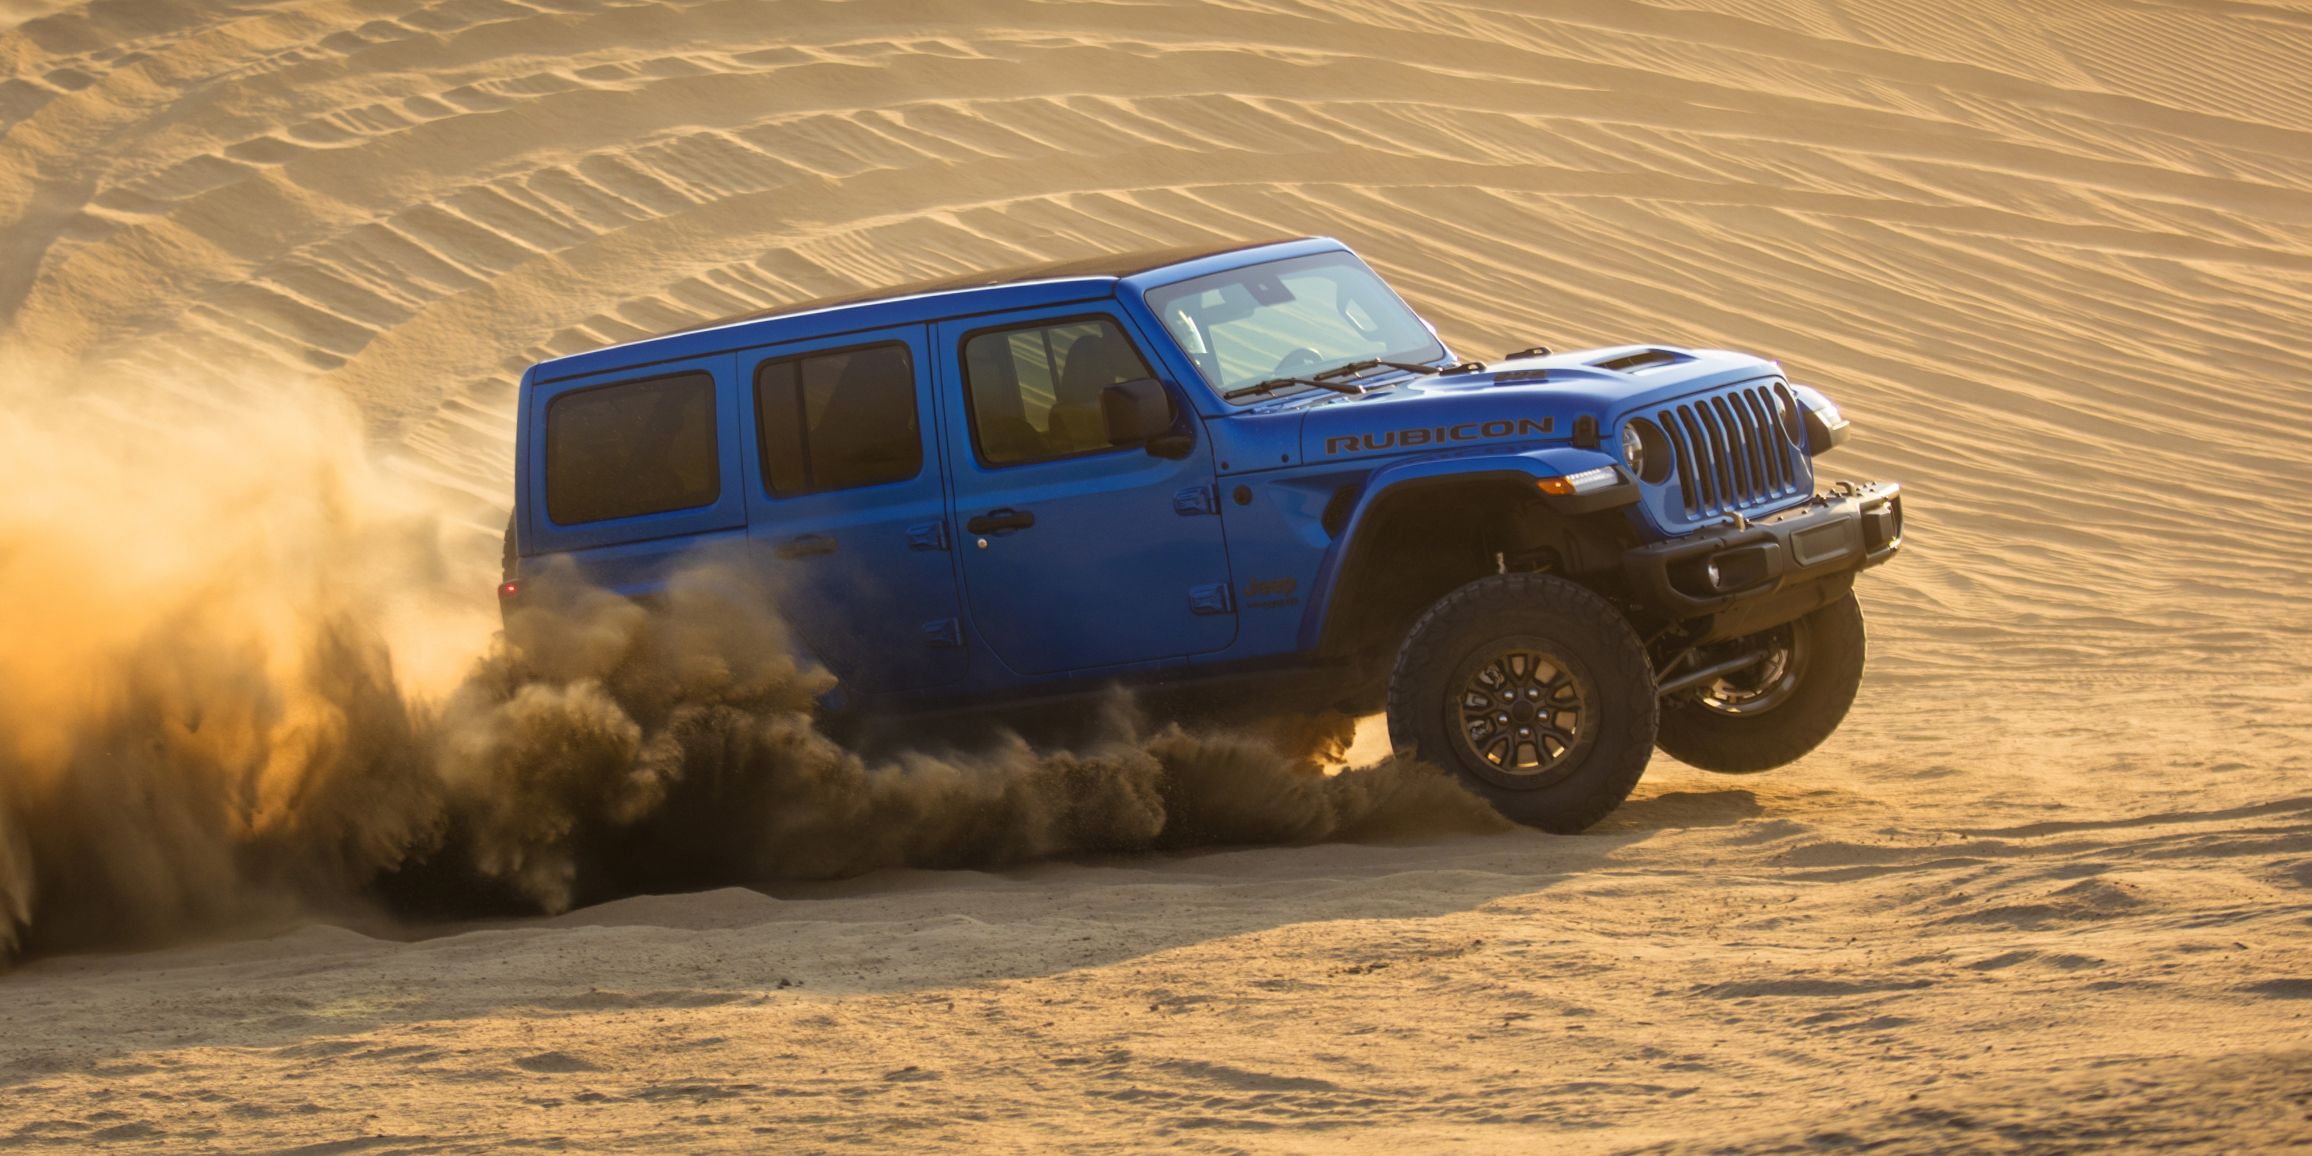 2021 Jeep Wrangler Rubicon 392 Fuel Mileage Is Very Bad